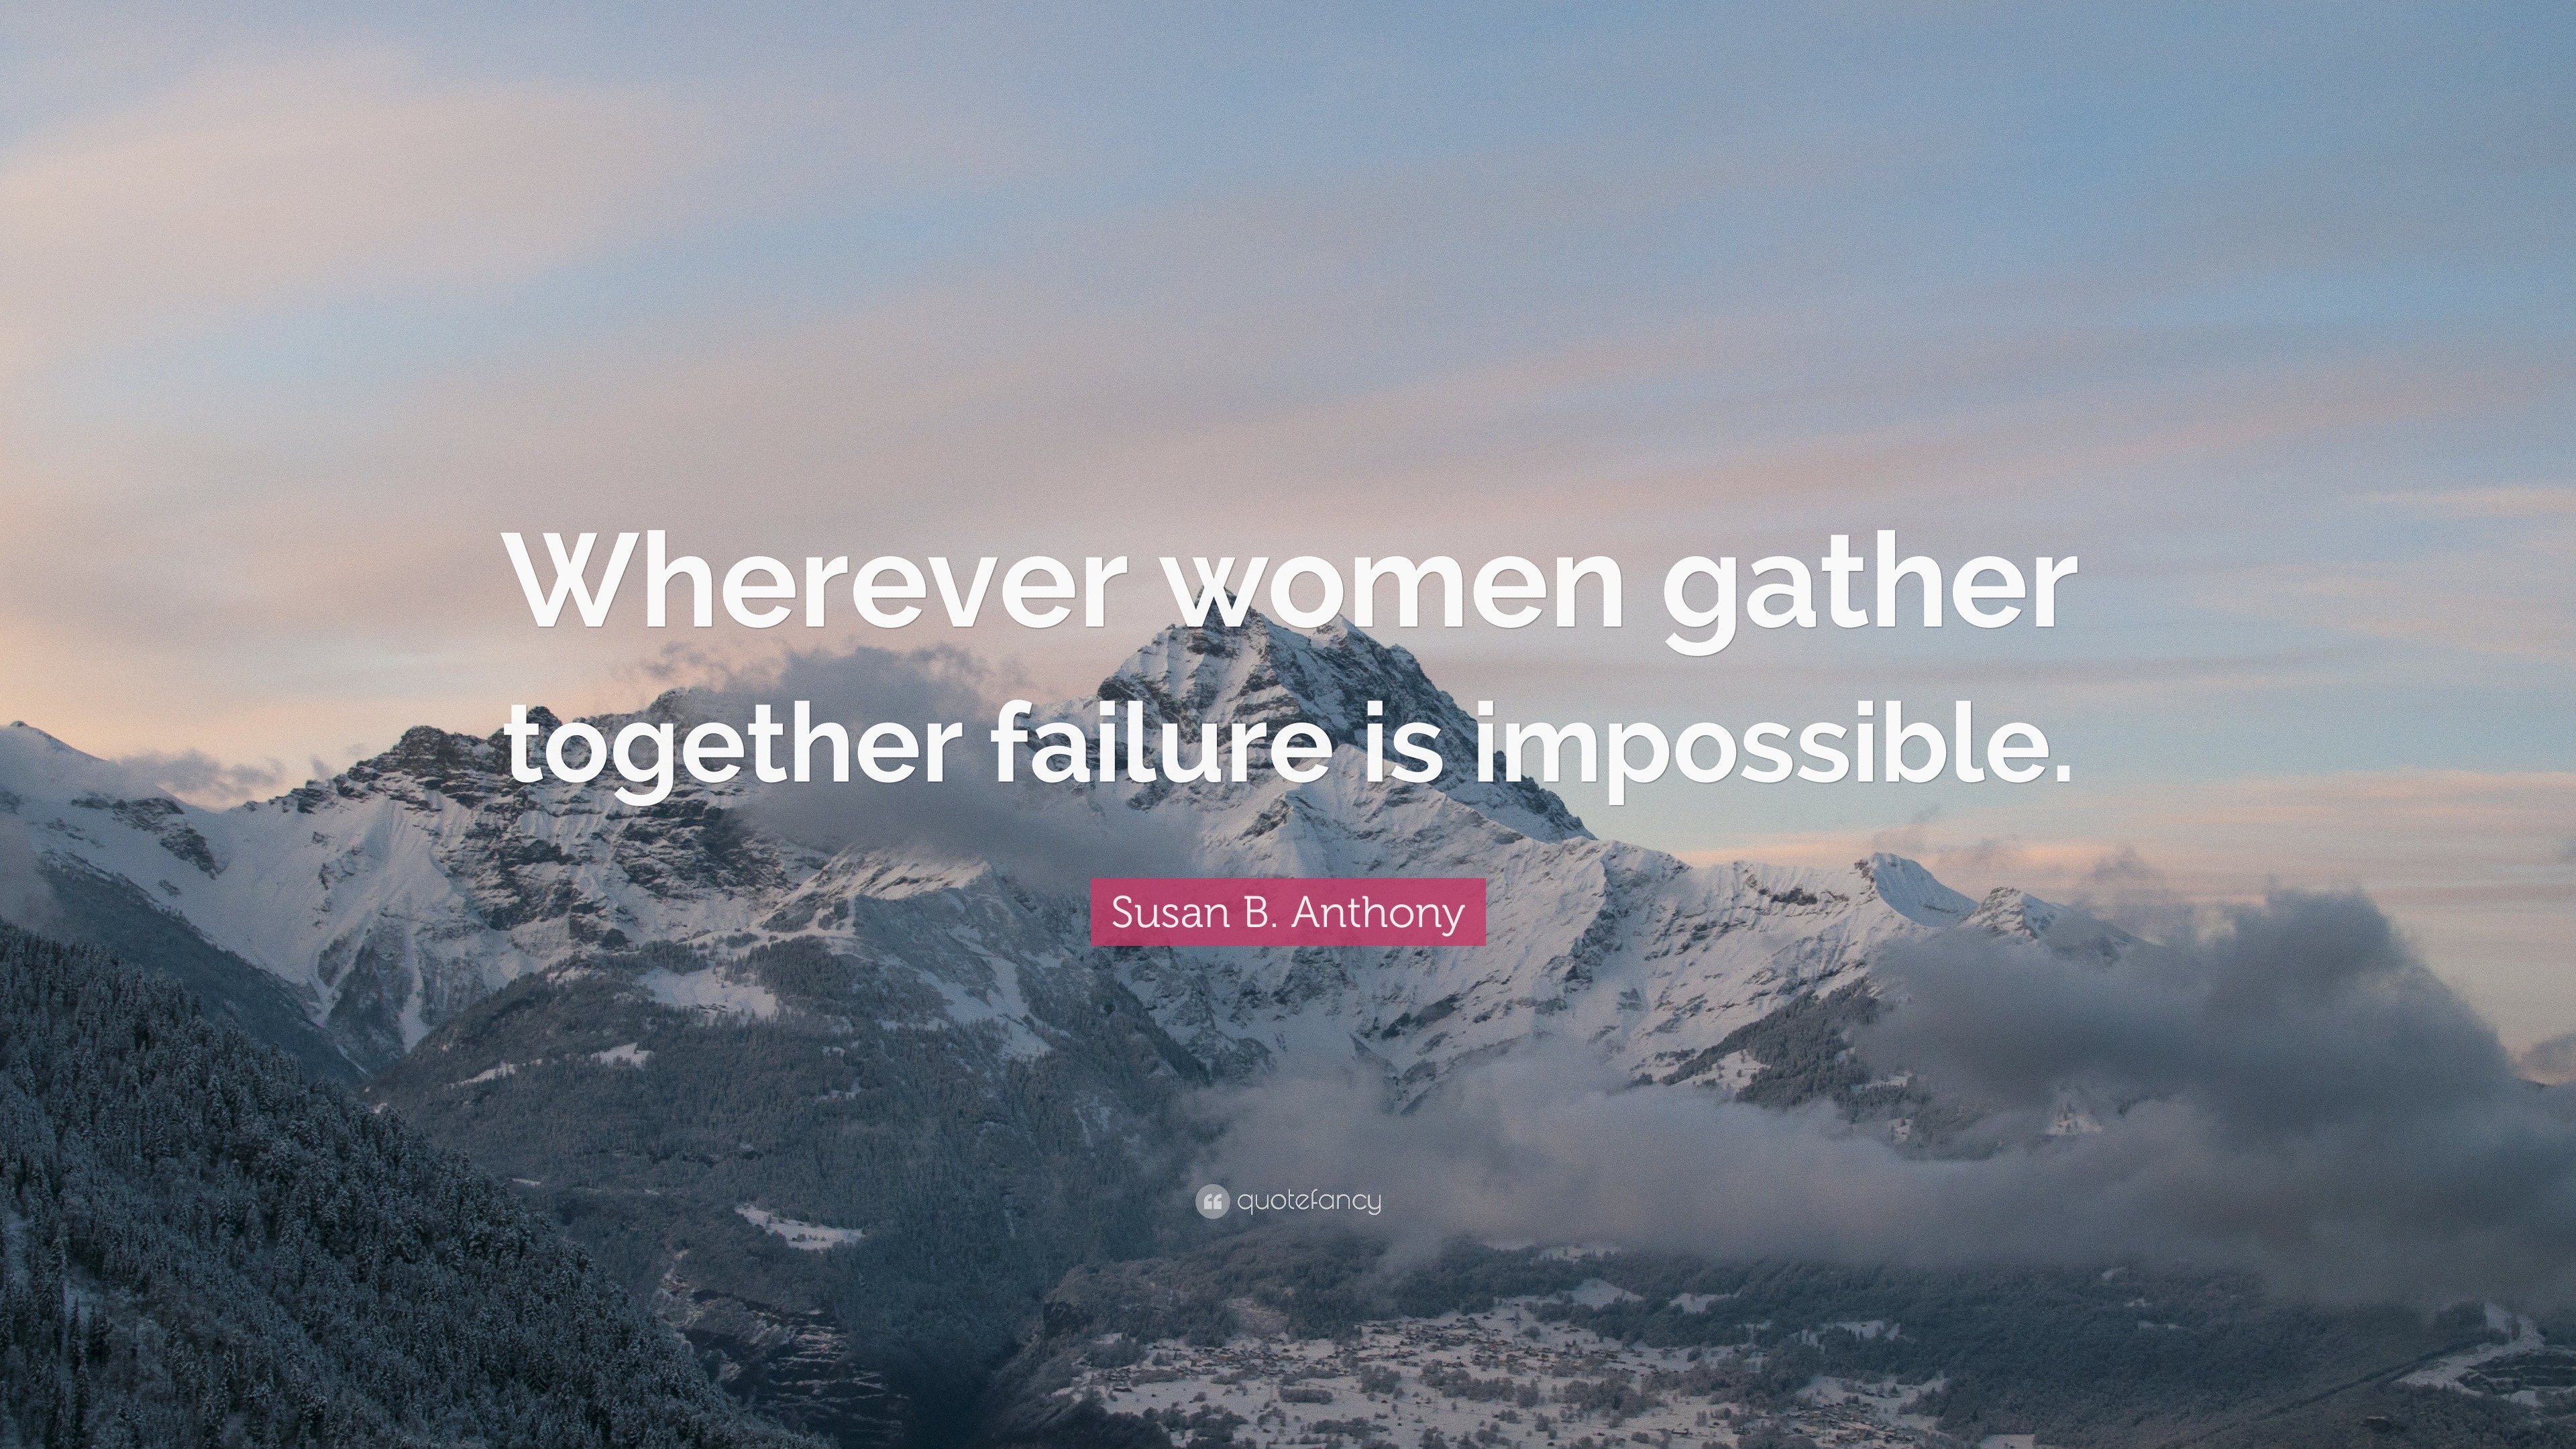 Susan B. Anthony Quote: “Wherever women gather together failure is impossible ...3840 x 2160